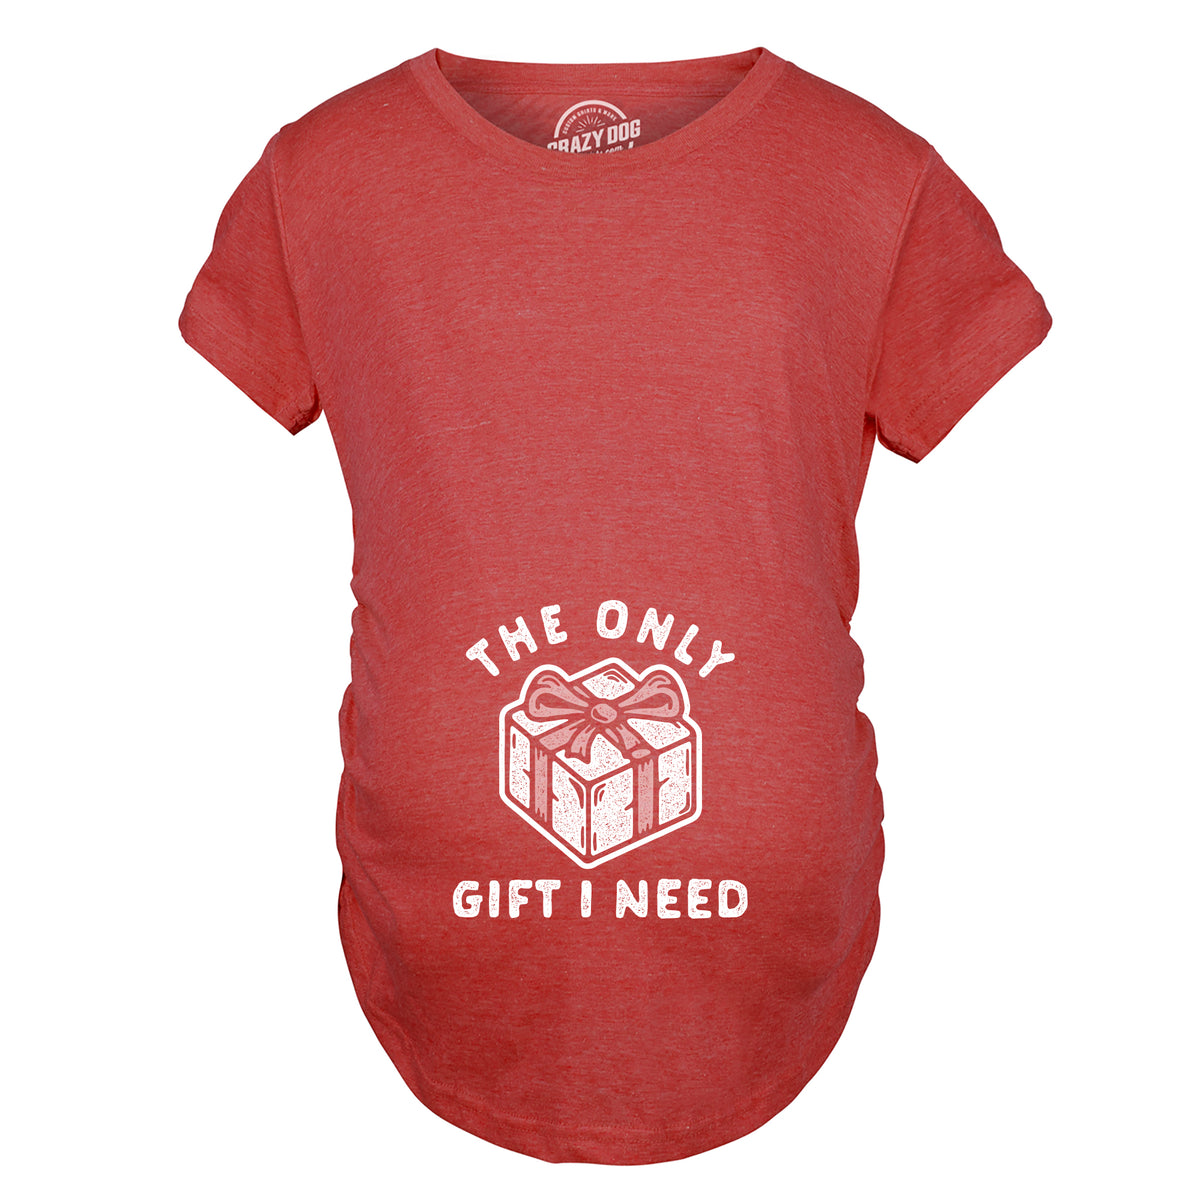 The Only Gift I Need Maternity T Shirt